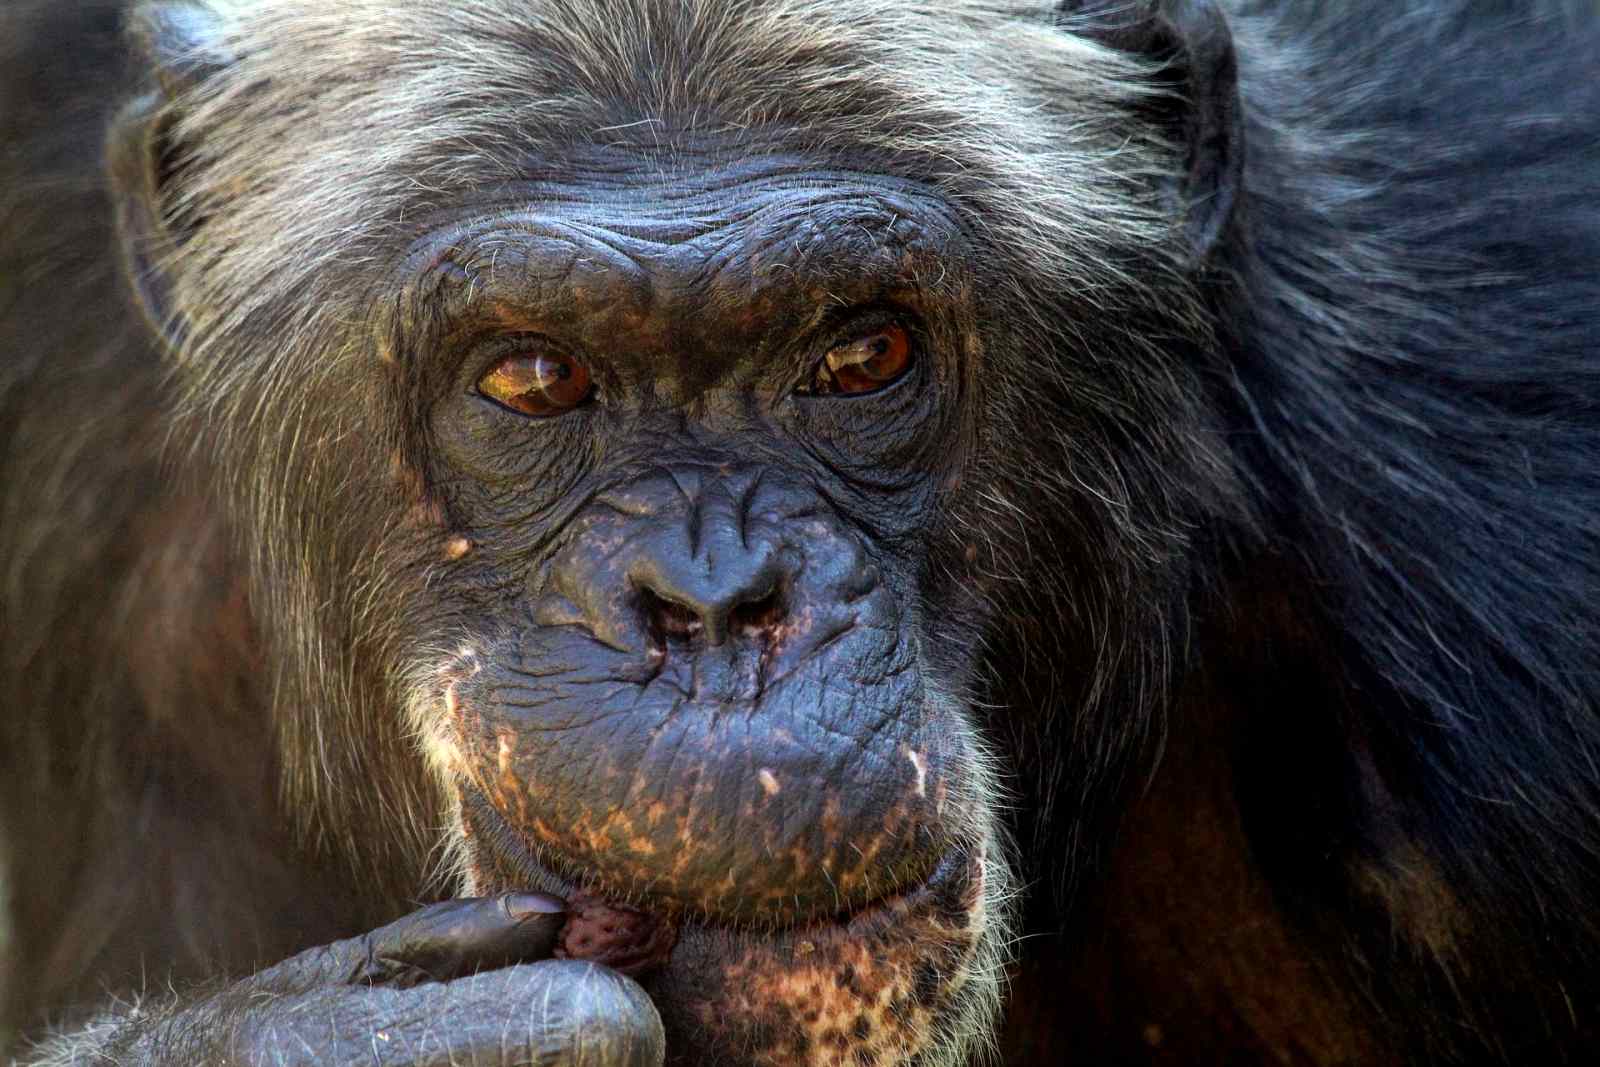 Guinea approves creation of largest sanctuary for the West African chimpanzee